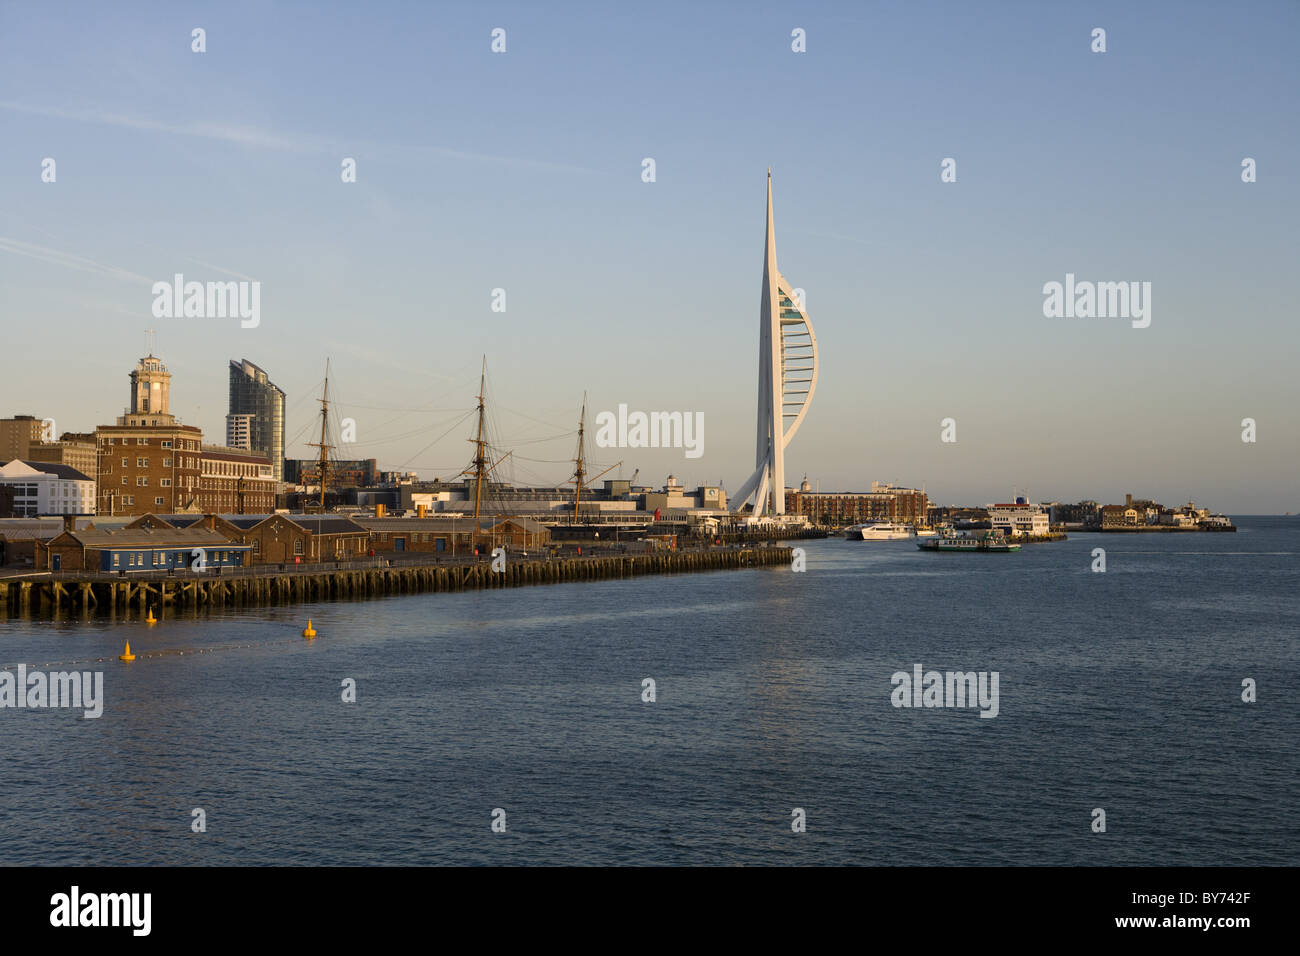 Portsmouth Historic Dockyard and Spinnaker Tower, Portsmouth, Hampshire, England, Europe Stock Photo